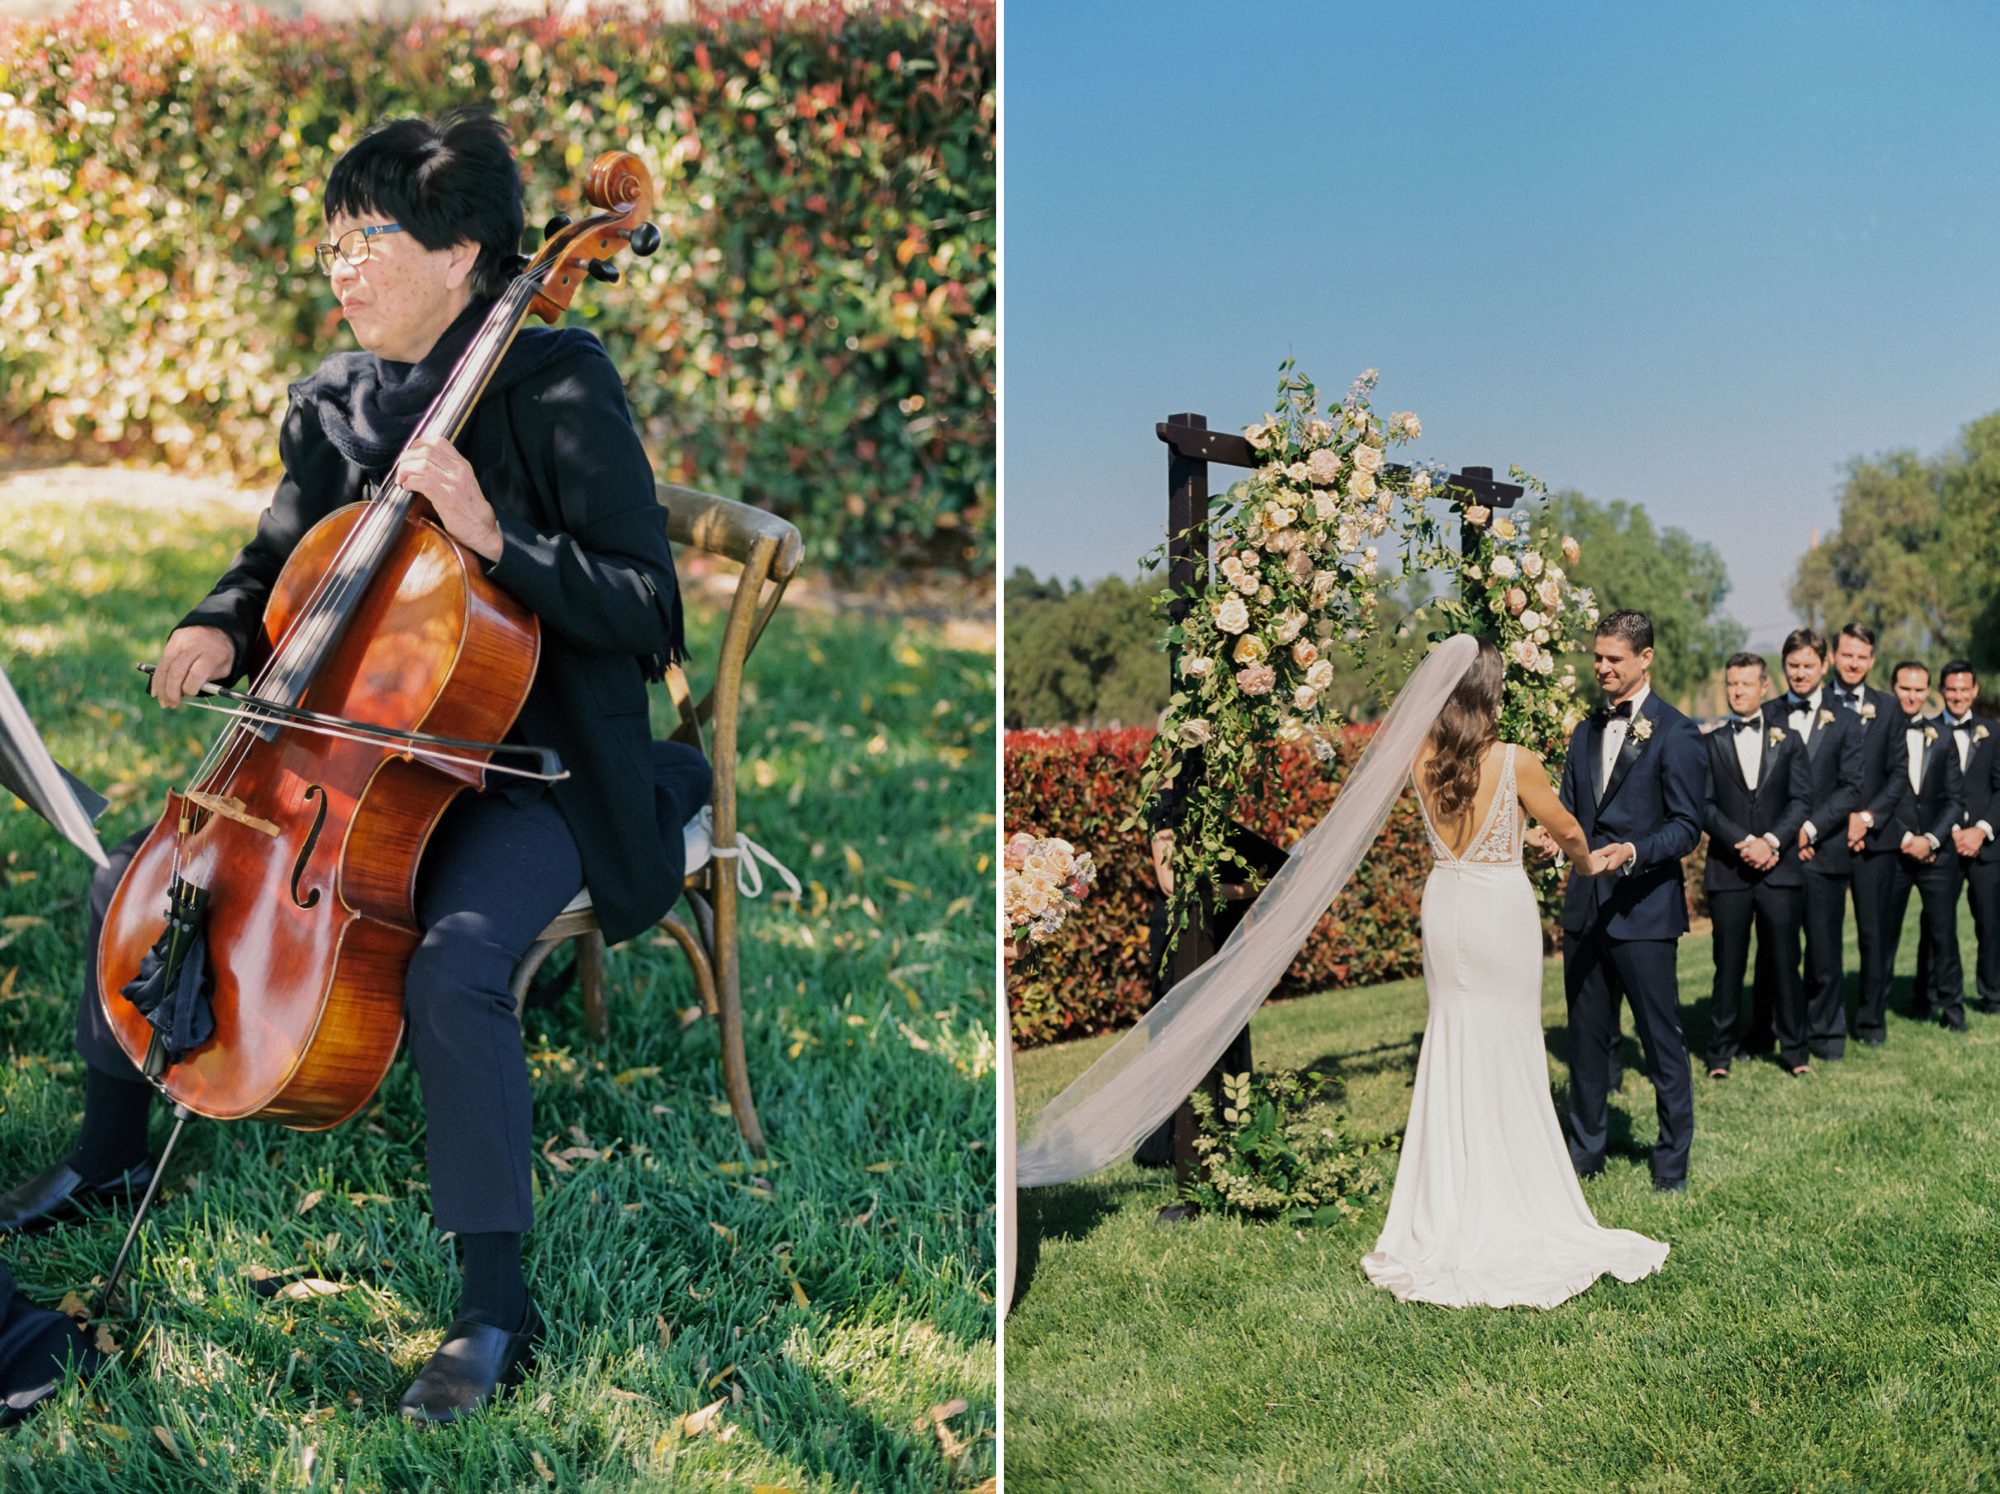 Mariposa quartet playing music for bride and grooms ceremony at the White Barn Edna Valley photographed by san luis obispo wedding photographers jessica sofranko